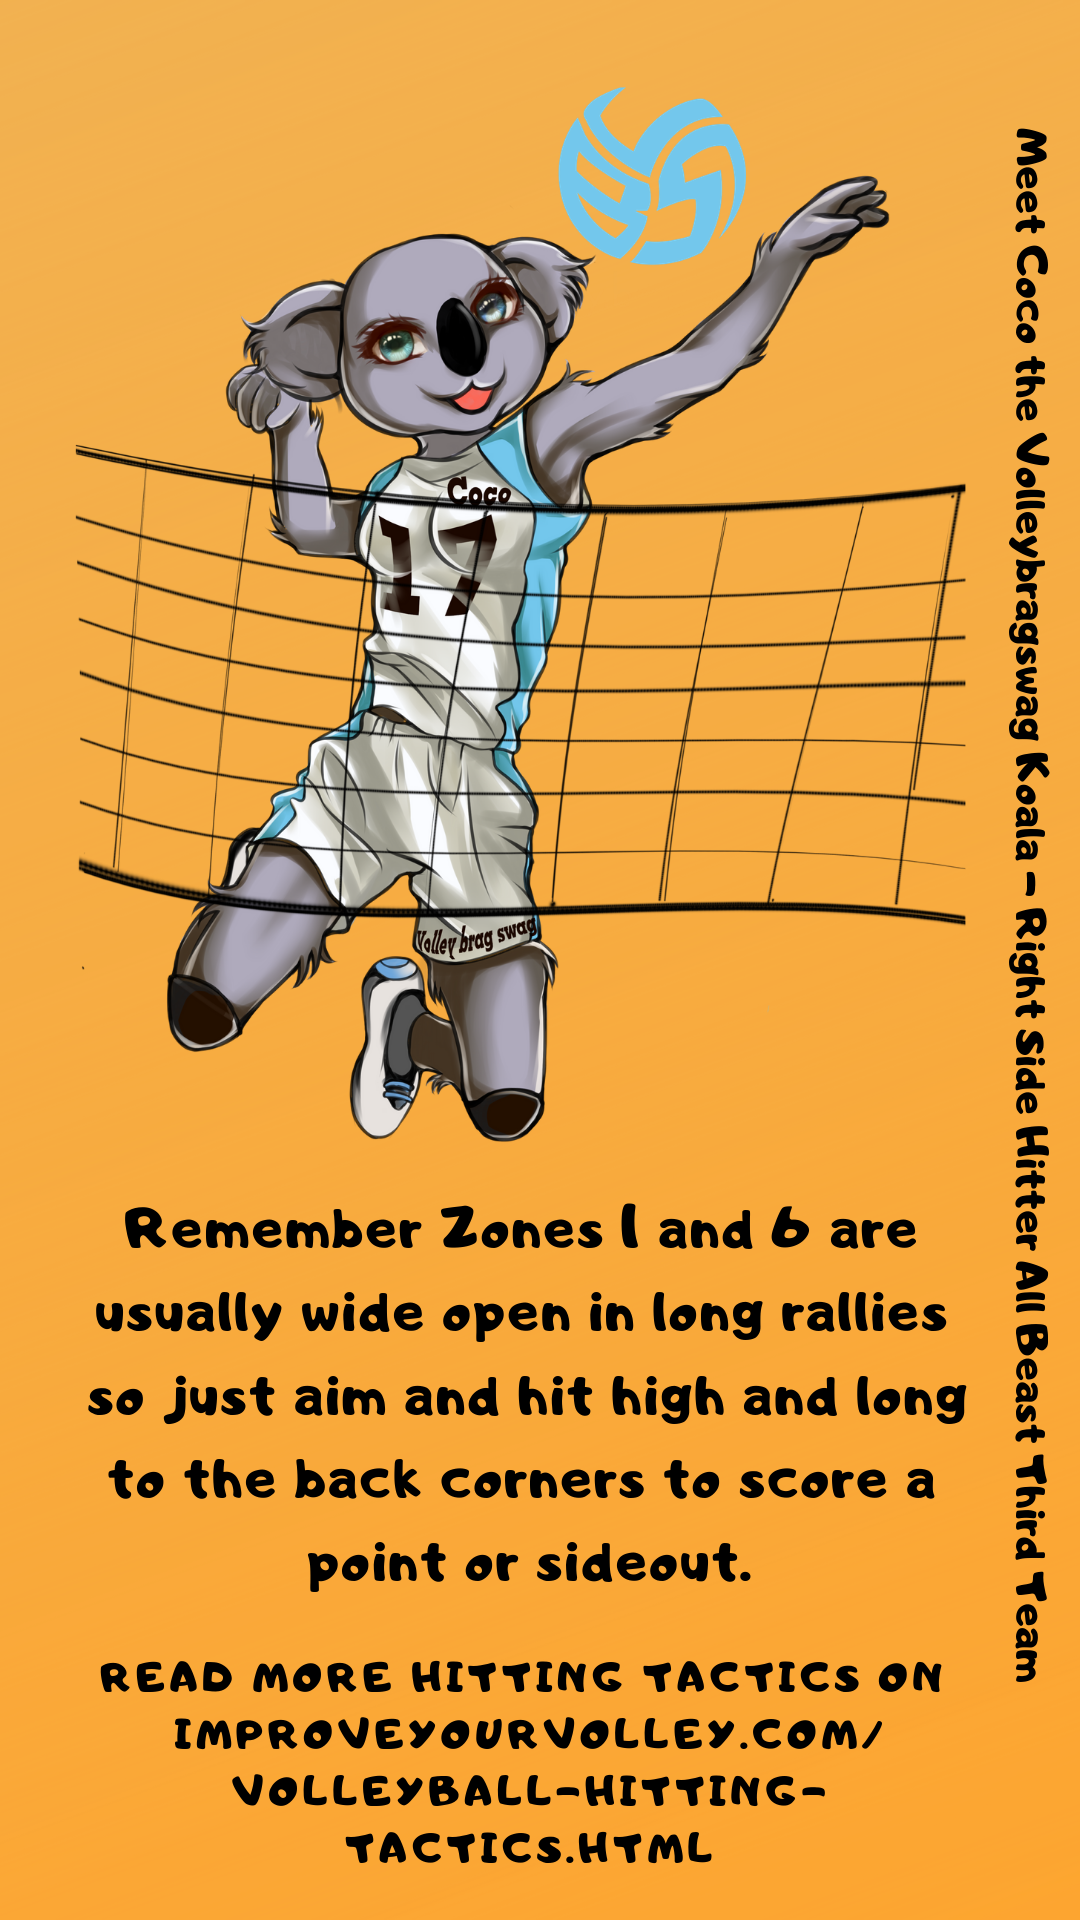 Hitting Tactics: Remember Zones 1 and 6 tend to be wide open during long rallies.